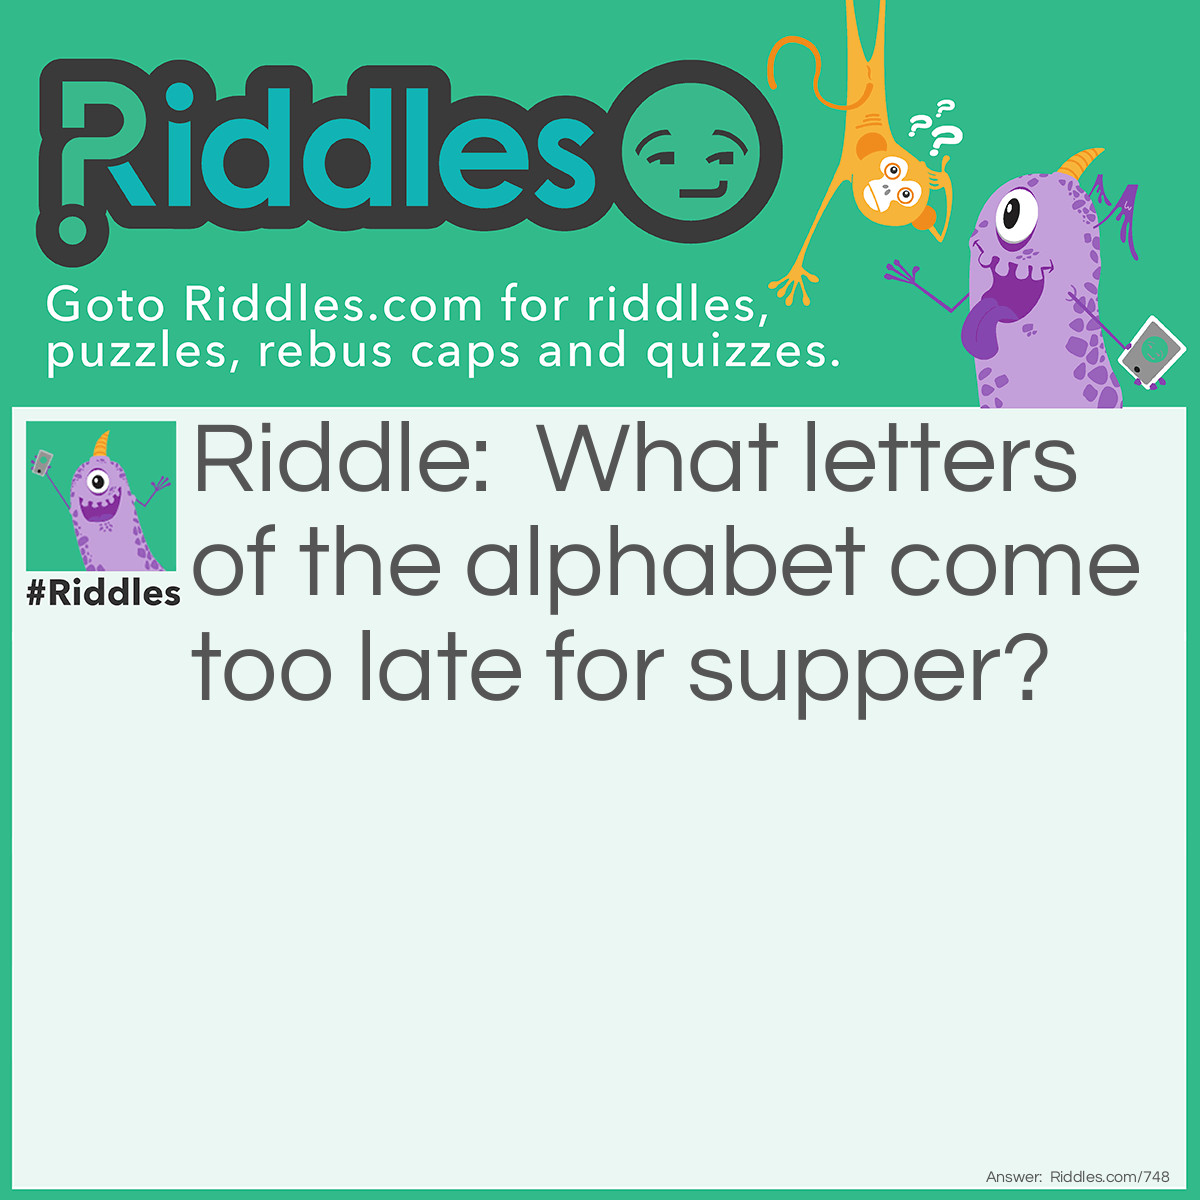 Riddle: What letters of the alphabet come too late for supper? Answer: Those that come after T.